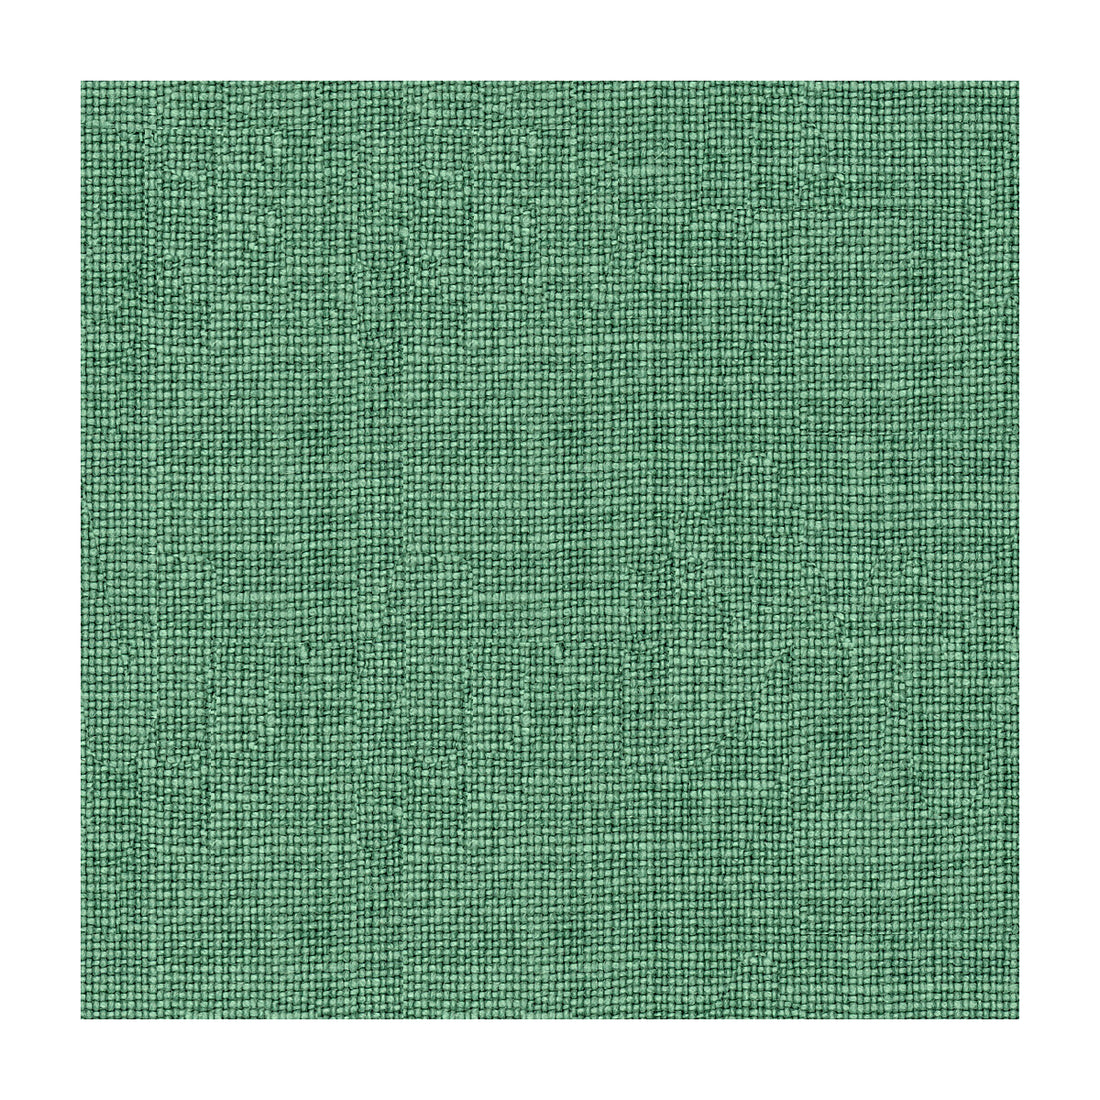 Kravet Basics fabric in 33767-13 color - pattern 33767.13.0 - by Kravet Basics in the Perfect Plains collection